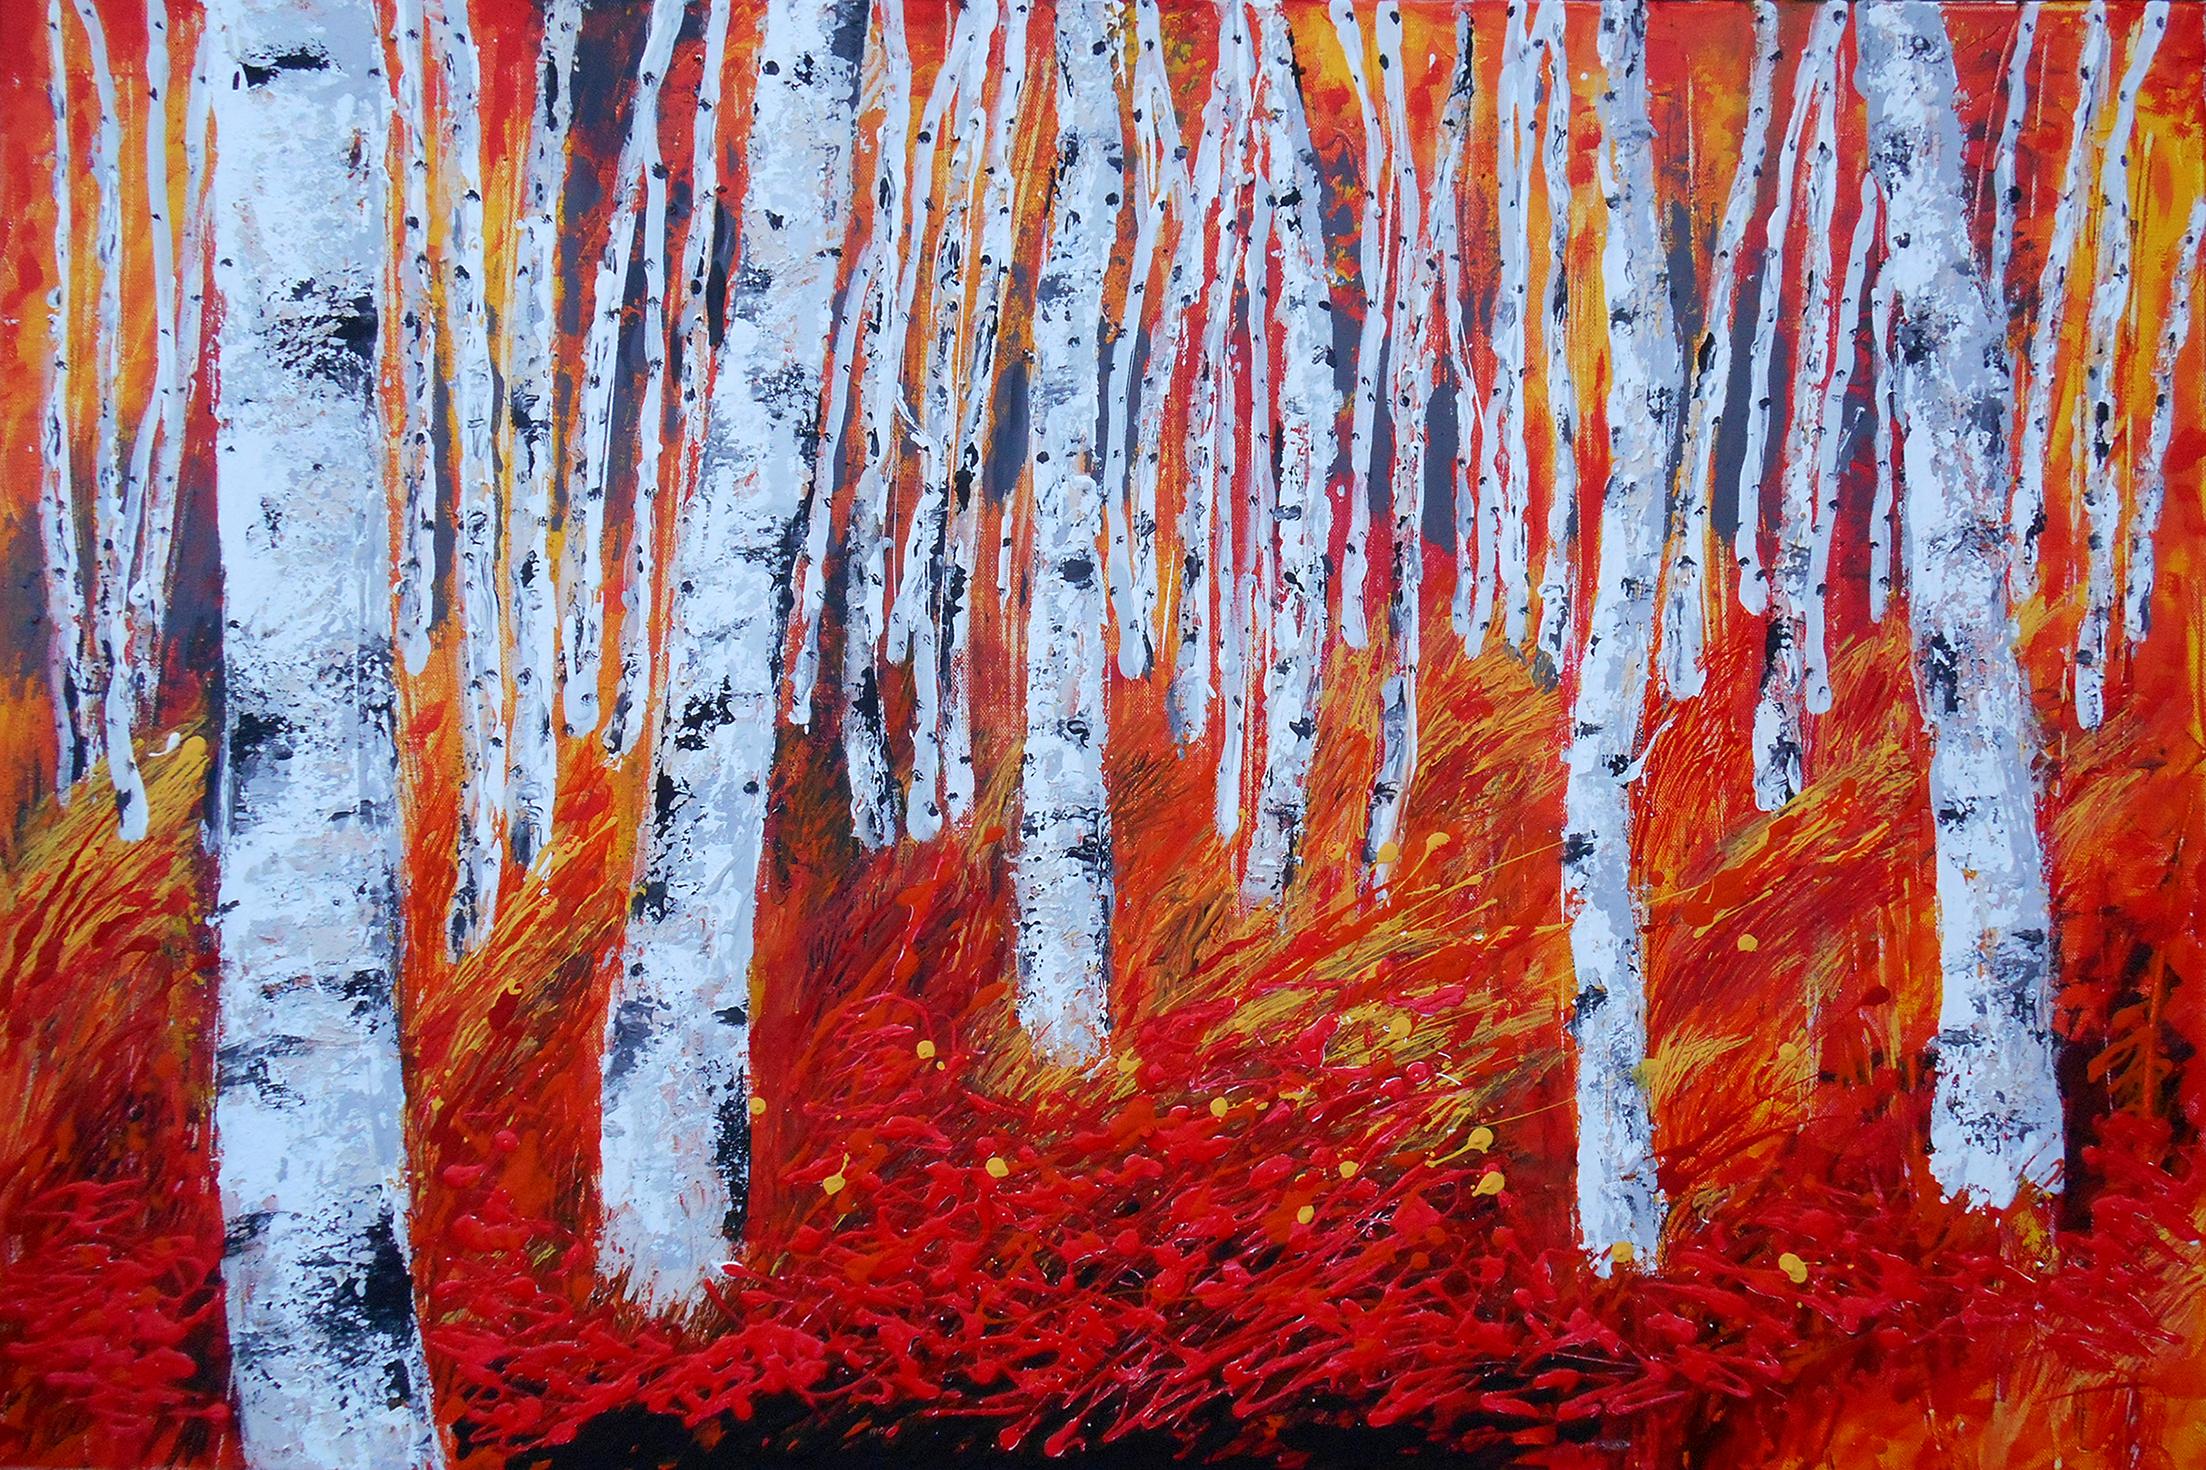 Birch tree is the symbol of new beginnings, regeneration, hope, new dawns and the promise of what is to come.   All my original paintings are created using high-quality canvases and paints.  Professional grade acrylics on a stretched wrapped canvas.